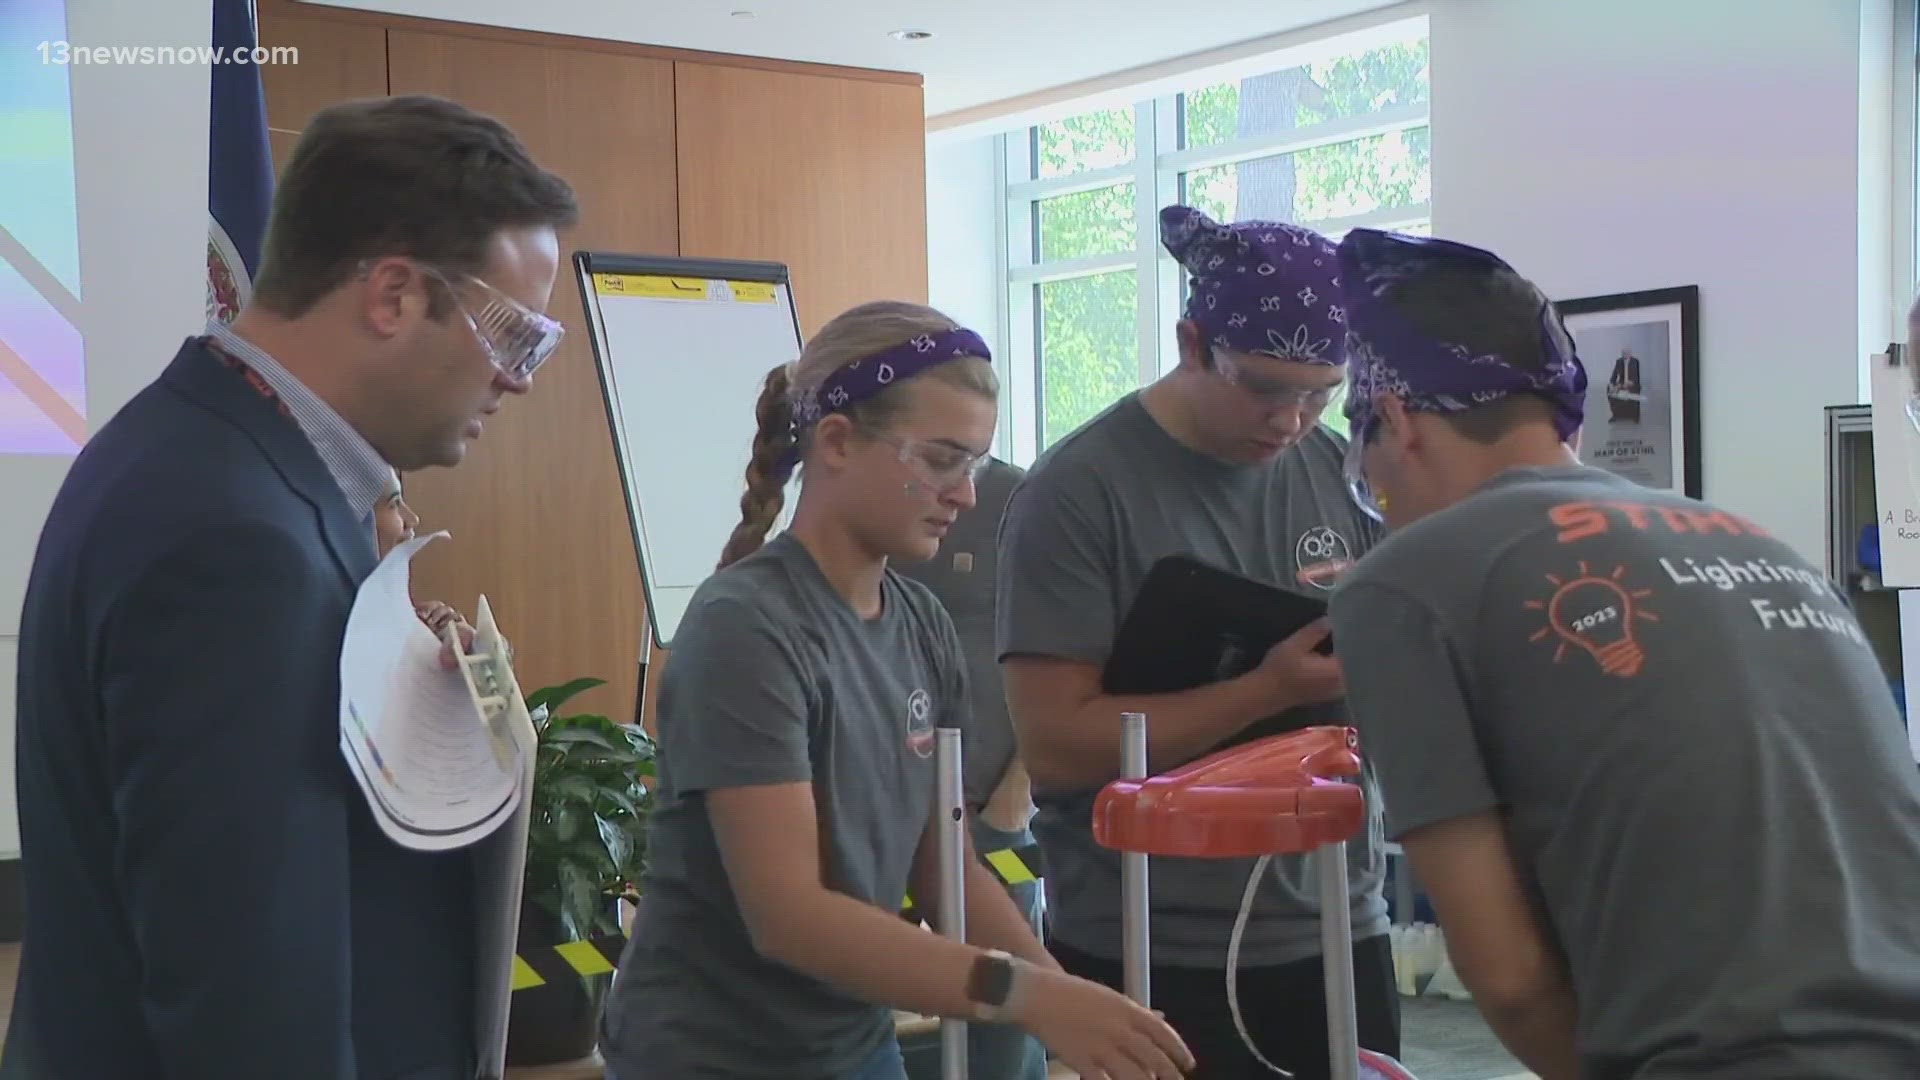 The “STIHL Manufacturing Technology Summer Camp” is back for its ninth year.